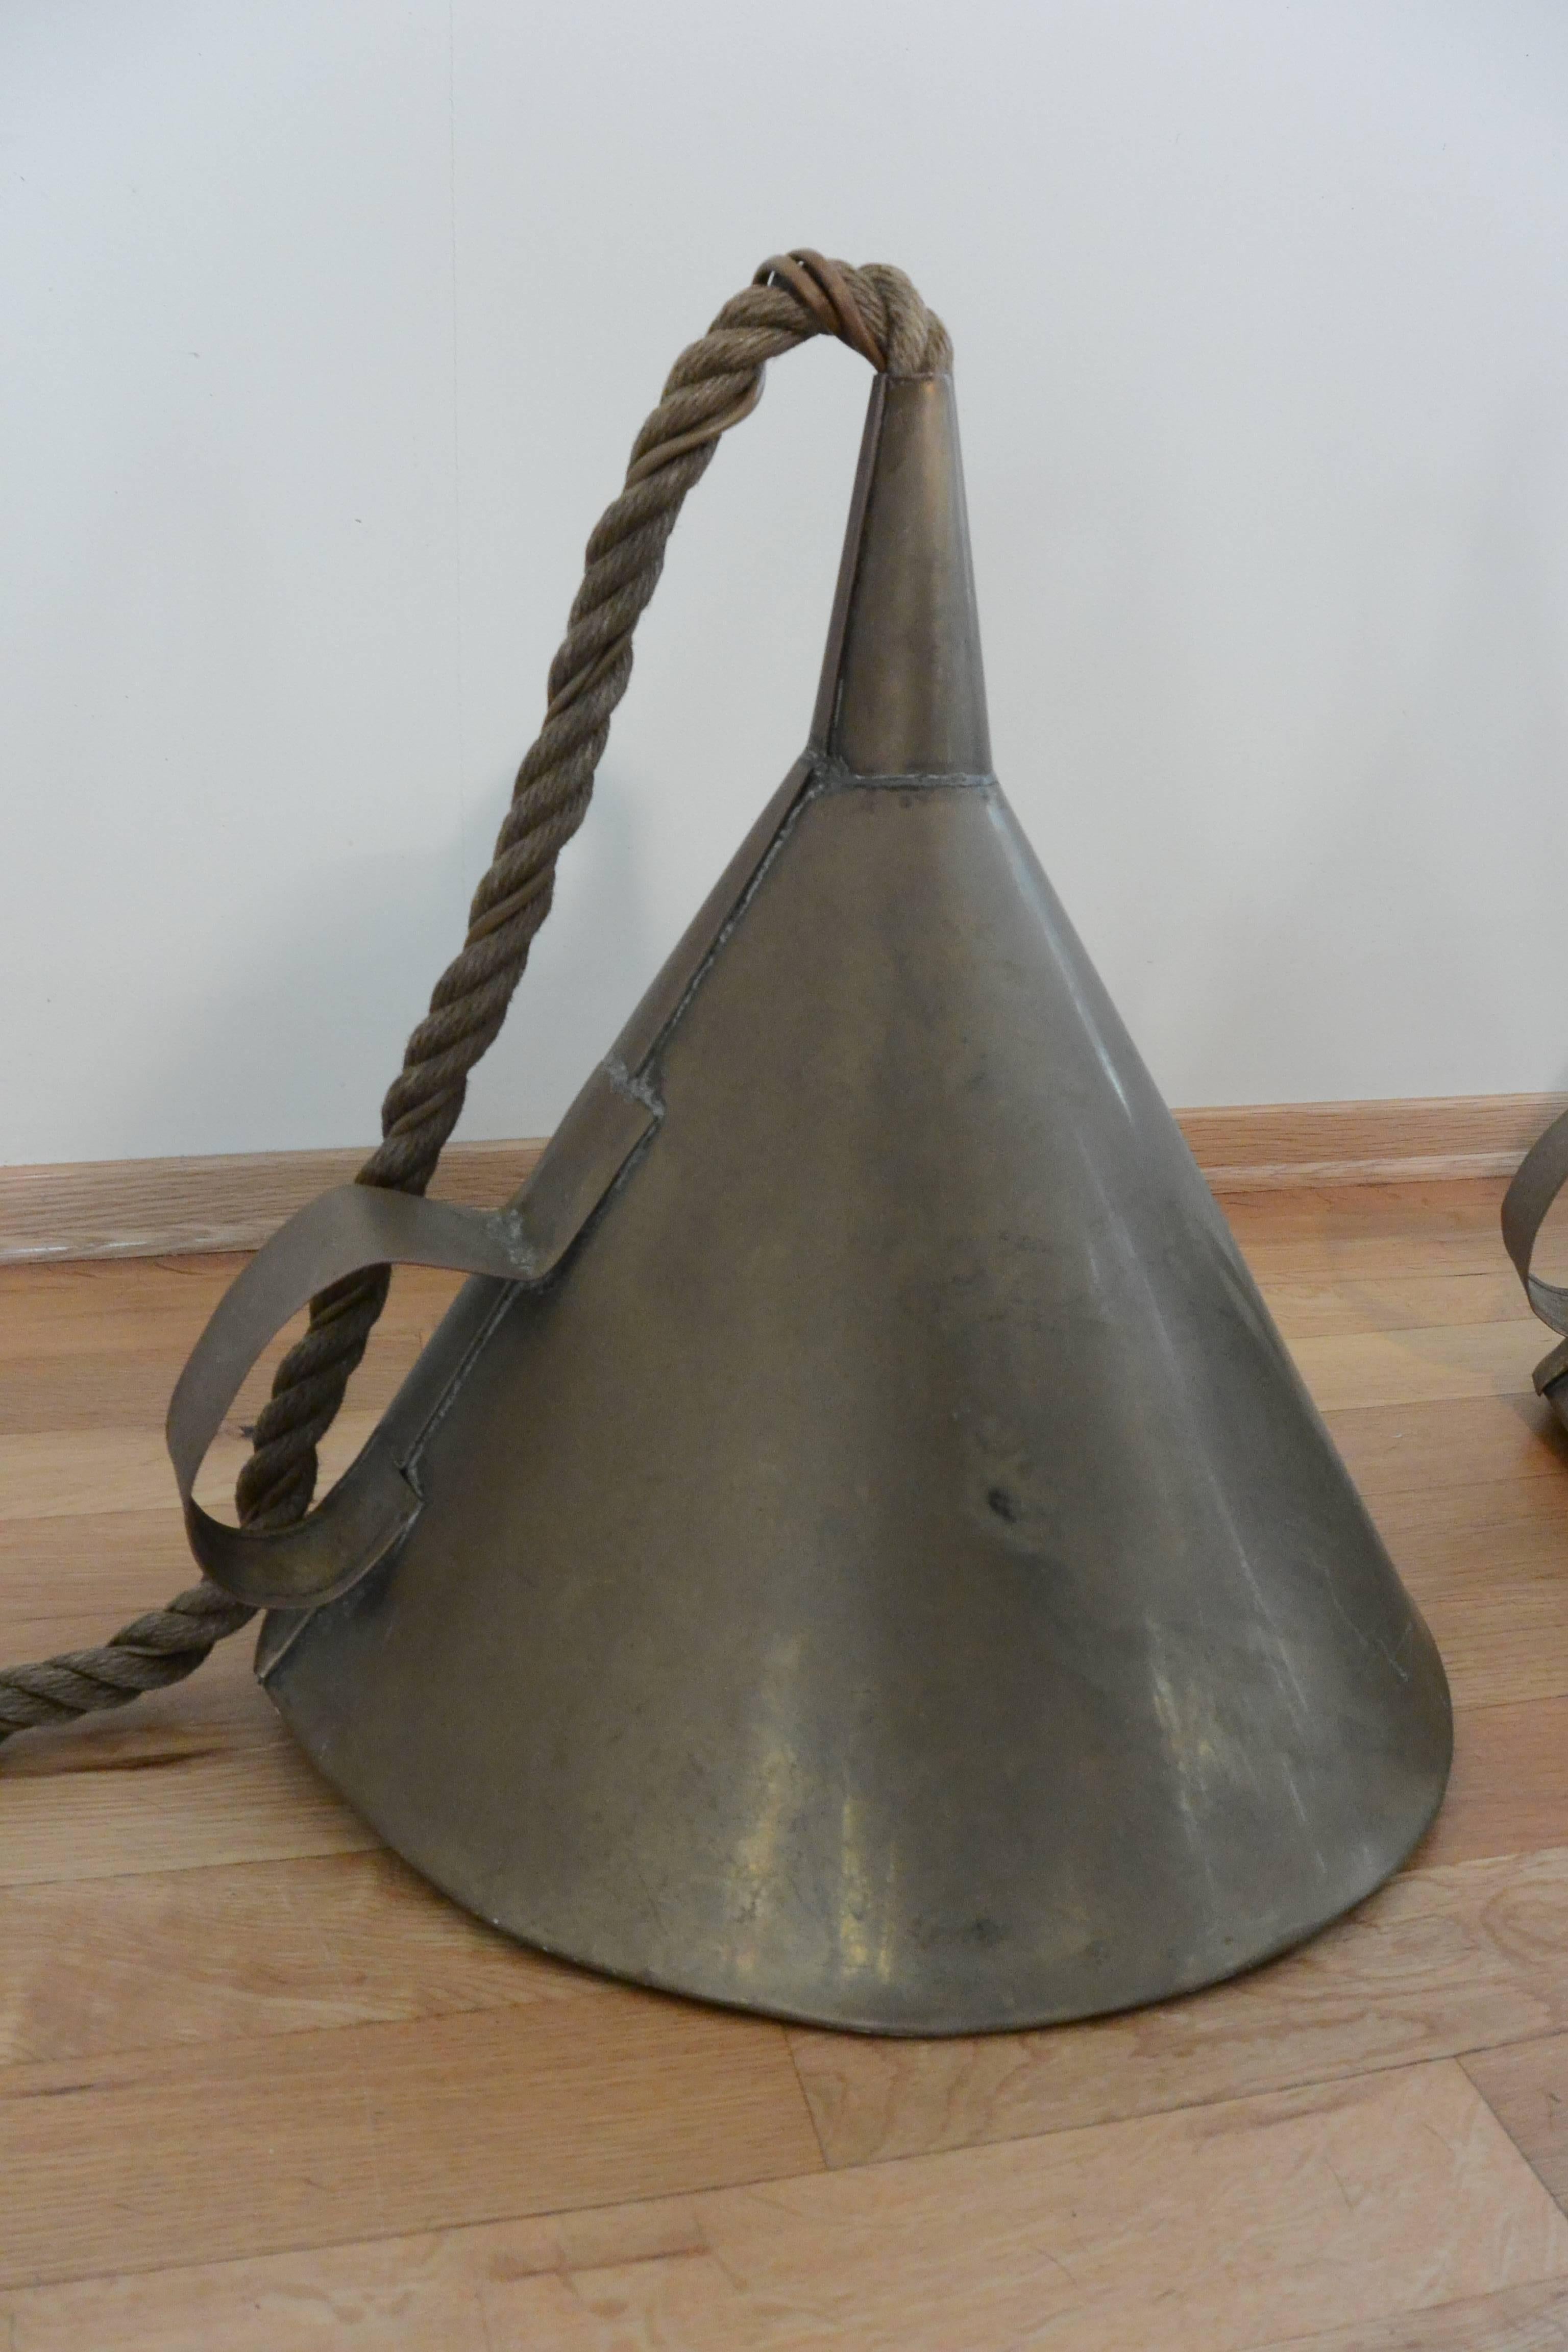 1970s solid brass and rope funnel pendant lamp shades removed from Norwegian business. 
 Lovely dull patina but can be cleaned to a high shine if desired. 
The pendants will look effective hanging up with the old vintage rope old and faded.
Each